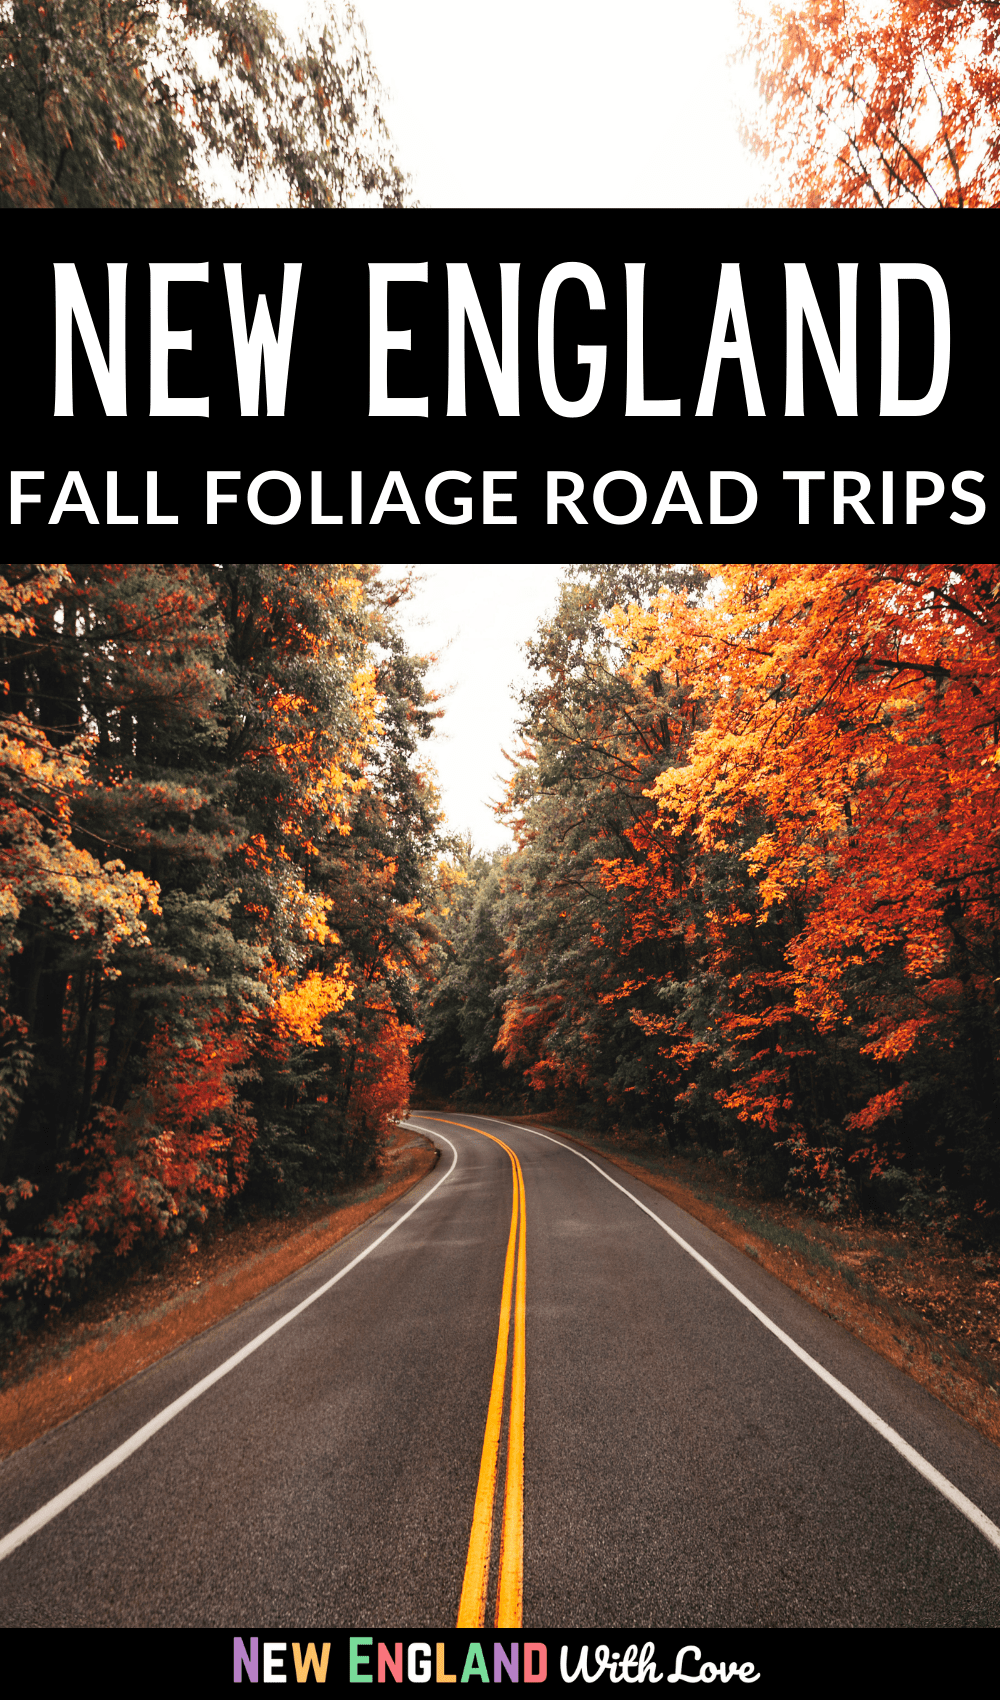 Pinterest graphic reading "NEW ENGLAND FALL FOLIAGE ROAD TRIPS"